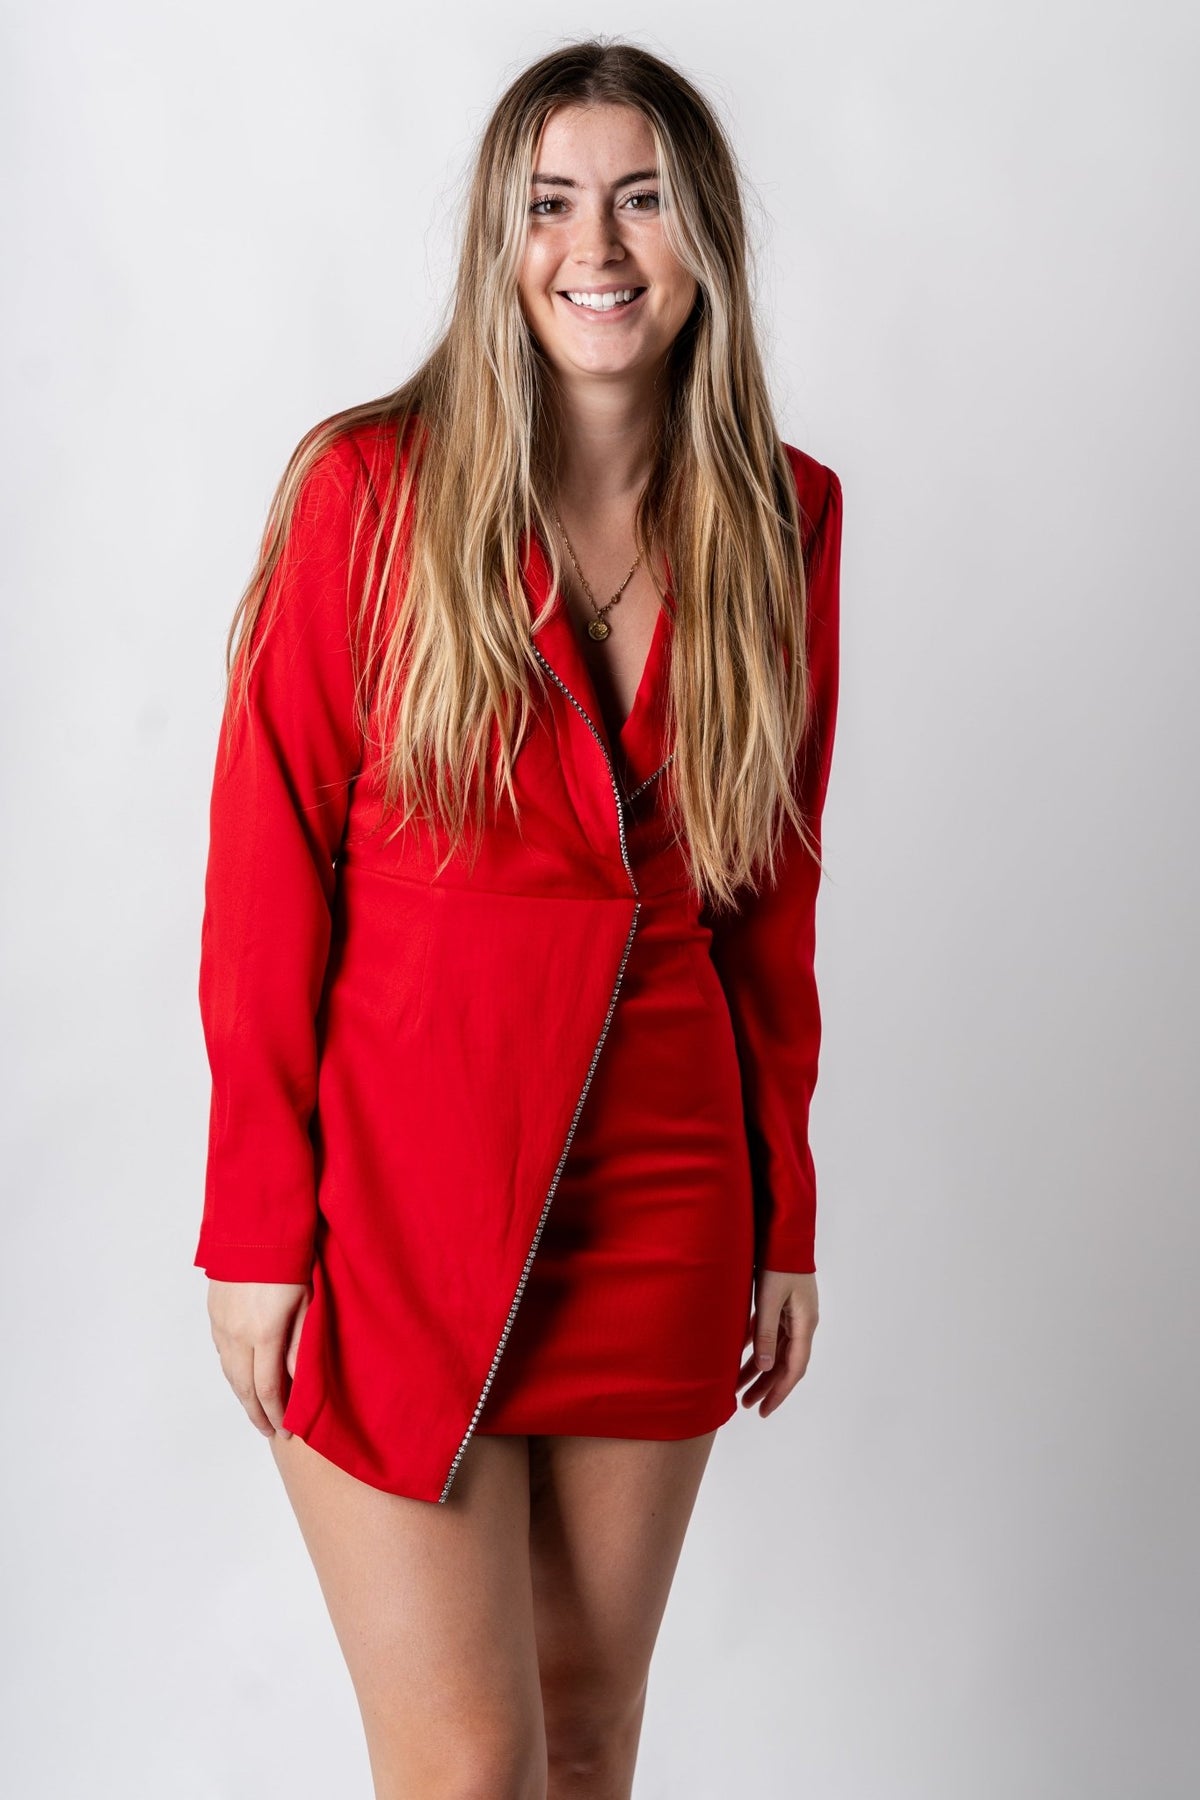 Rhinestone detail blazer dress flame red - Trendy Holiday Apparel at Lush Fashion Lounge Boutique in Oklahoma City